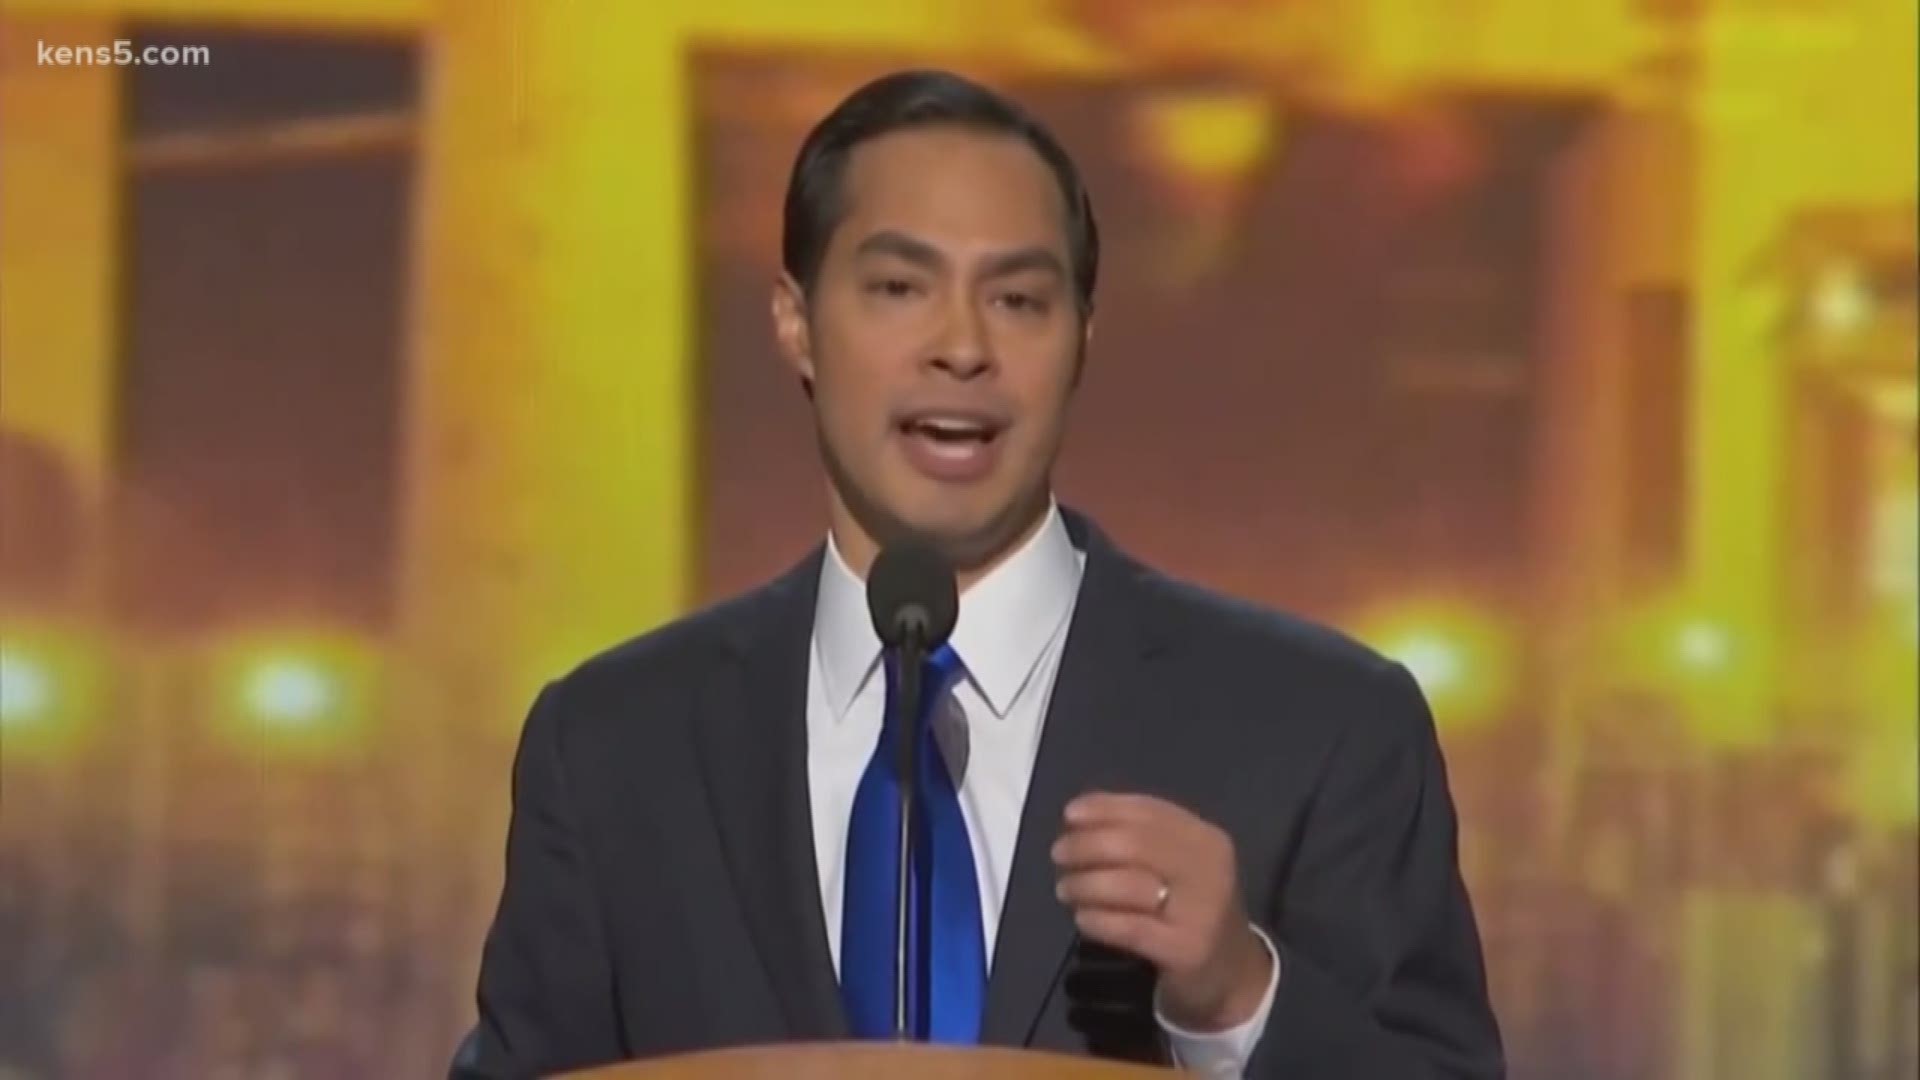 Democratic presidential candidate and fomer San Antonio Mayor Julián Castro pledged to visit all 50 states during his campaign. "When I'm President, everyone will count," he said.